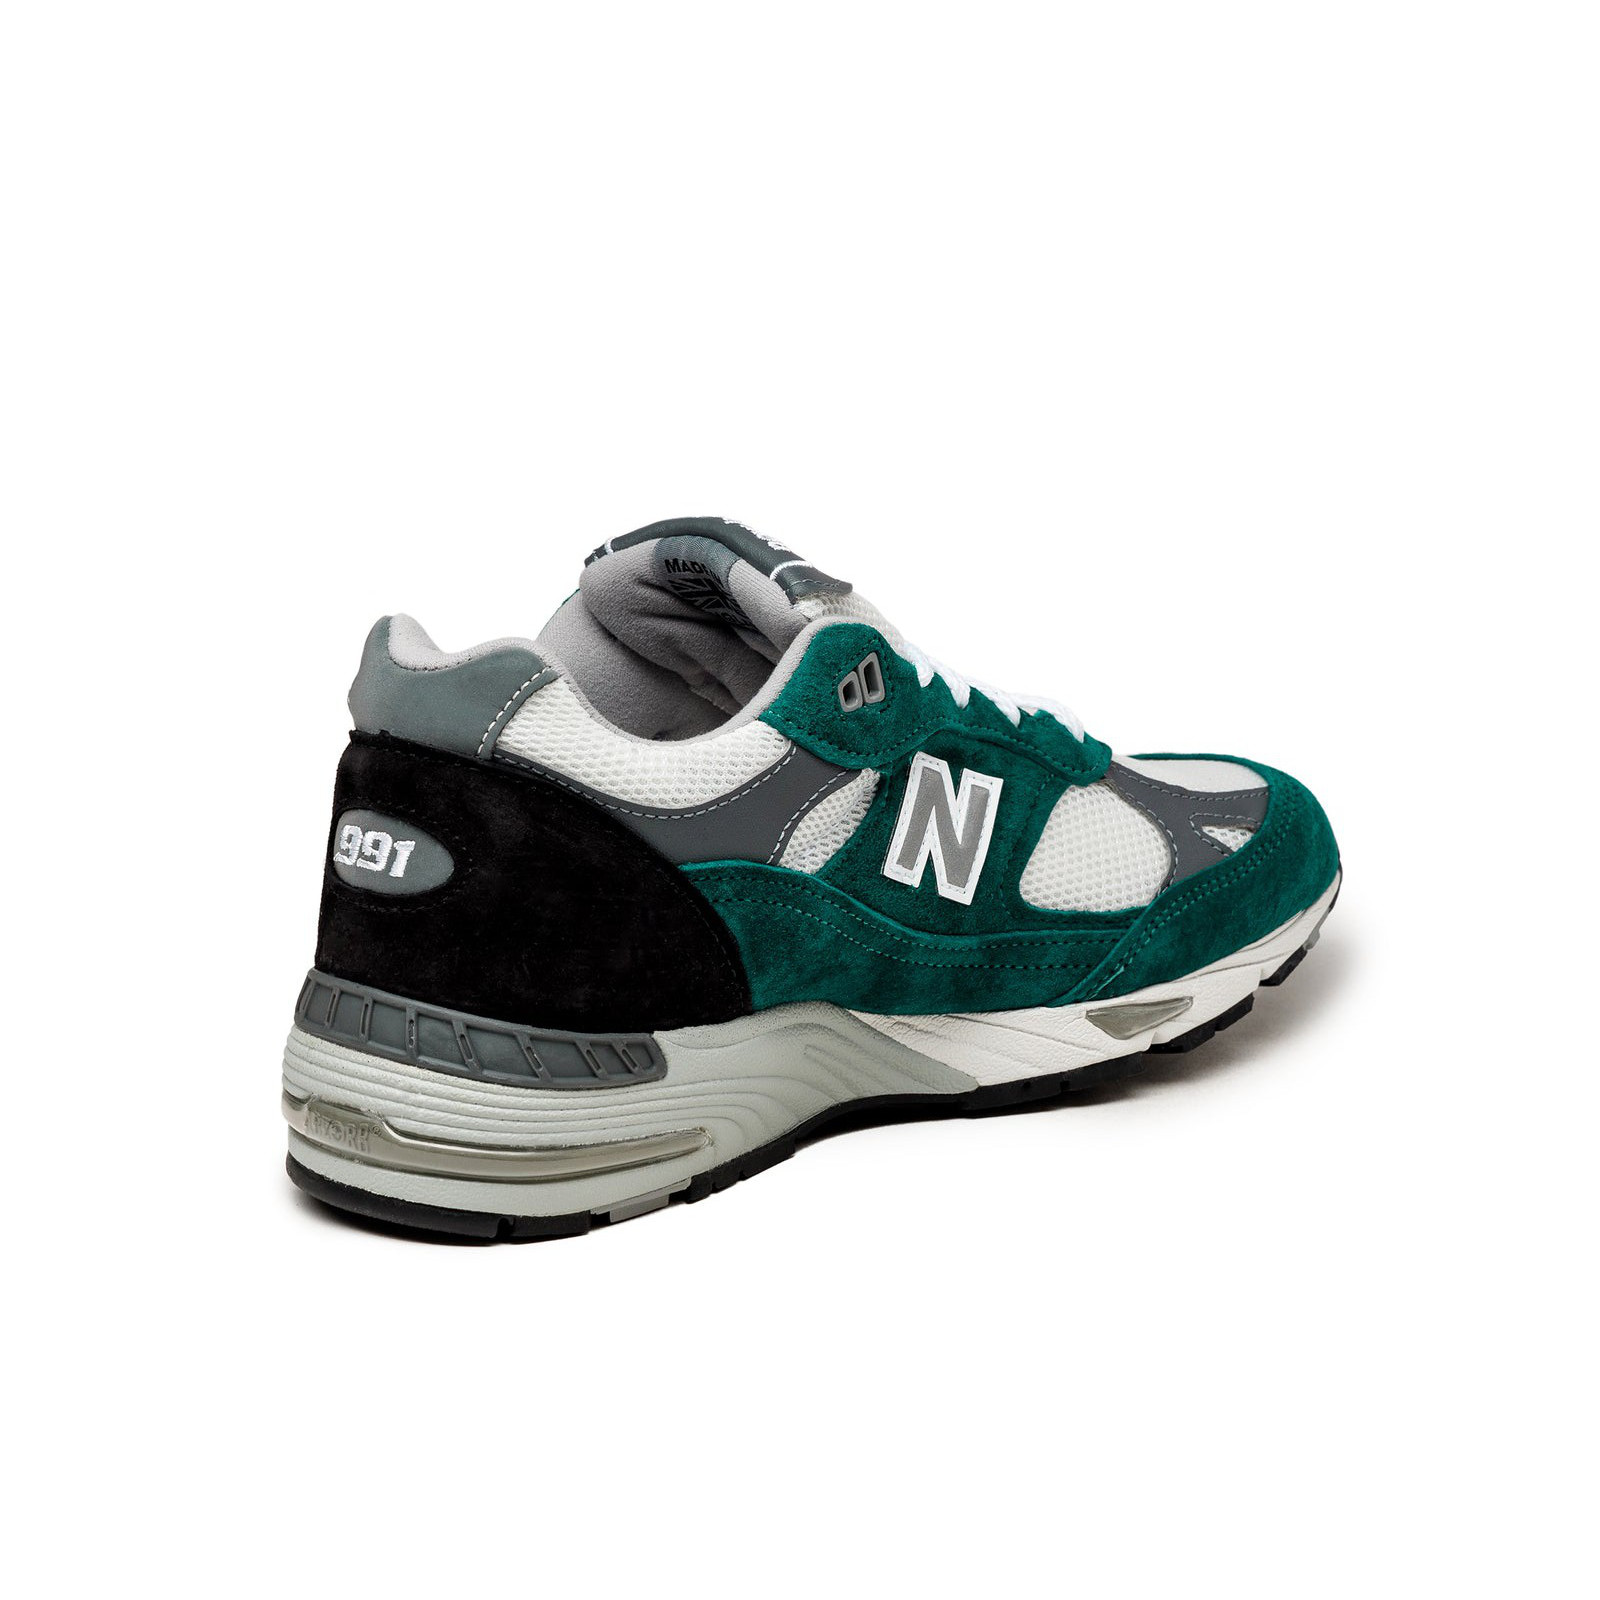 New Balance M991TLK
Made in England
Pacific / Alloy